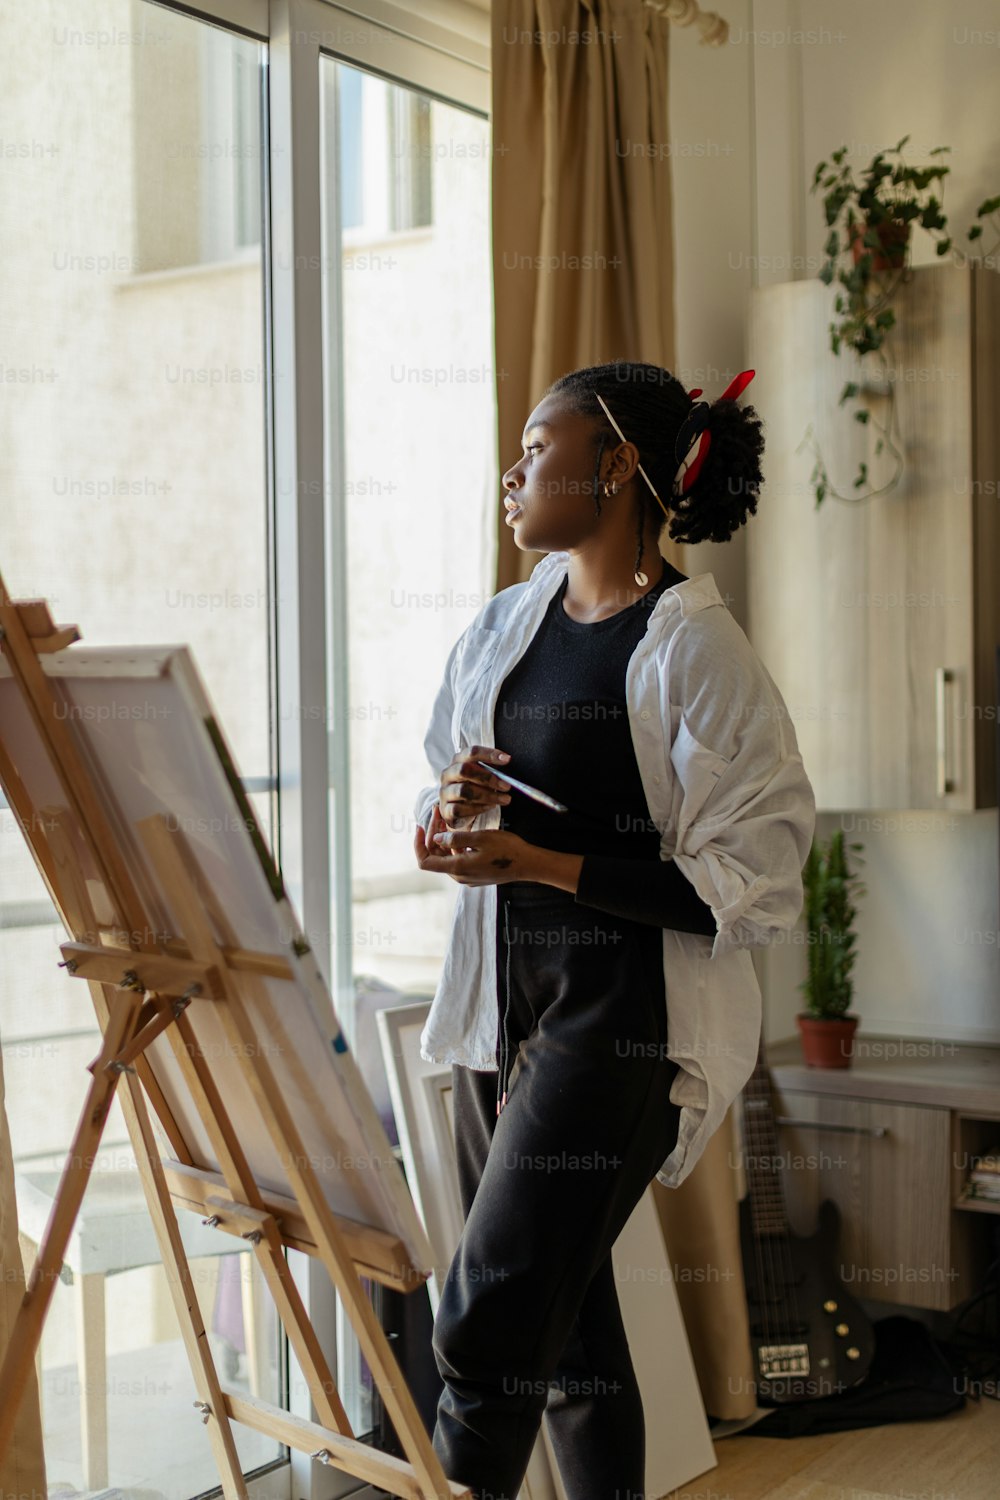 a woman is standing in front of a easel